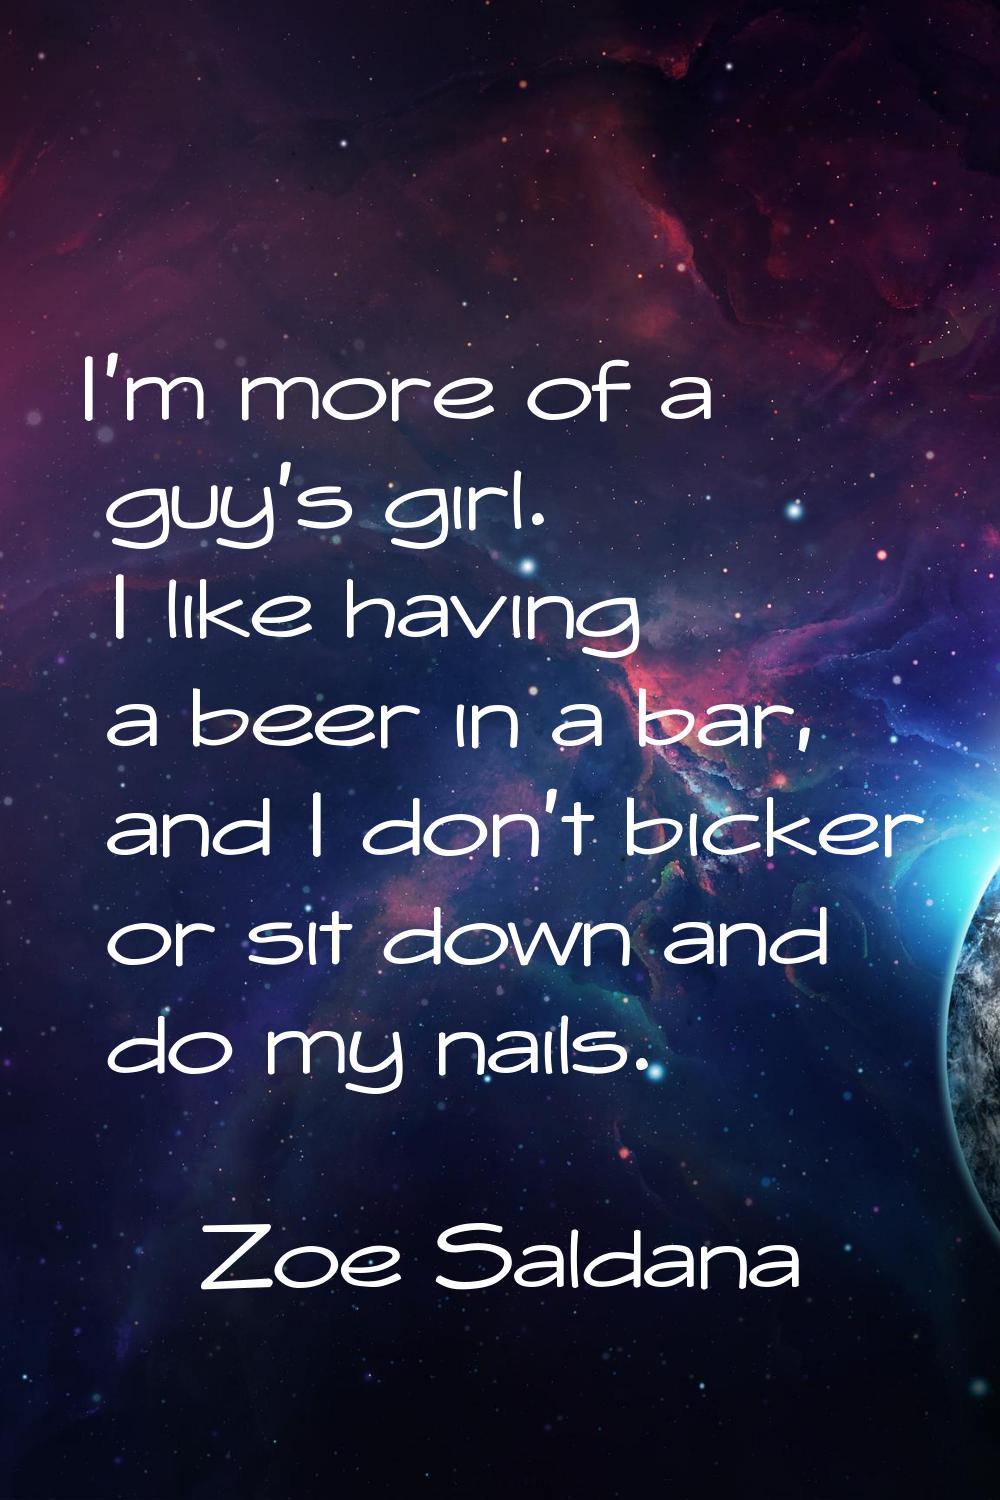 I'm more of a guy's girl. I like having a beer in a bar, and I don't bicker or sit down and do my n